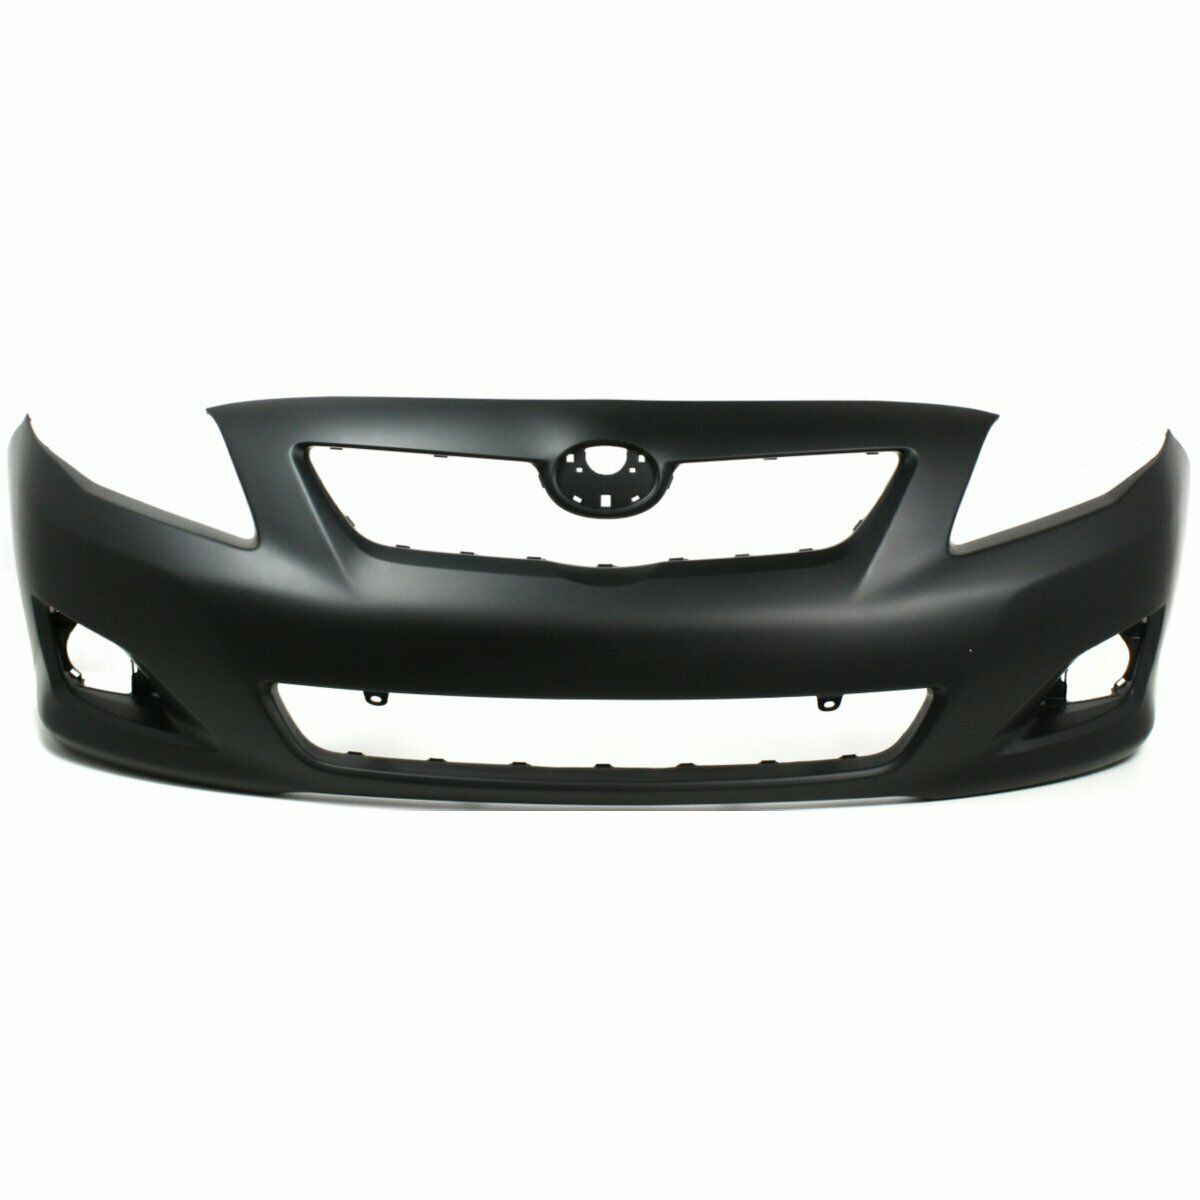 2009-2010 Toyota Corolla S Front Bumper Painted to Match